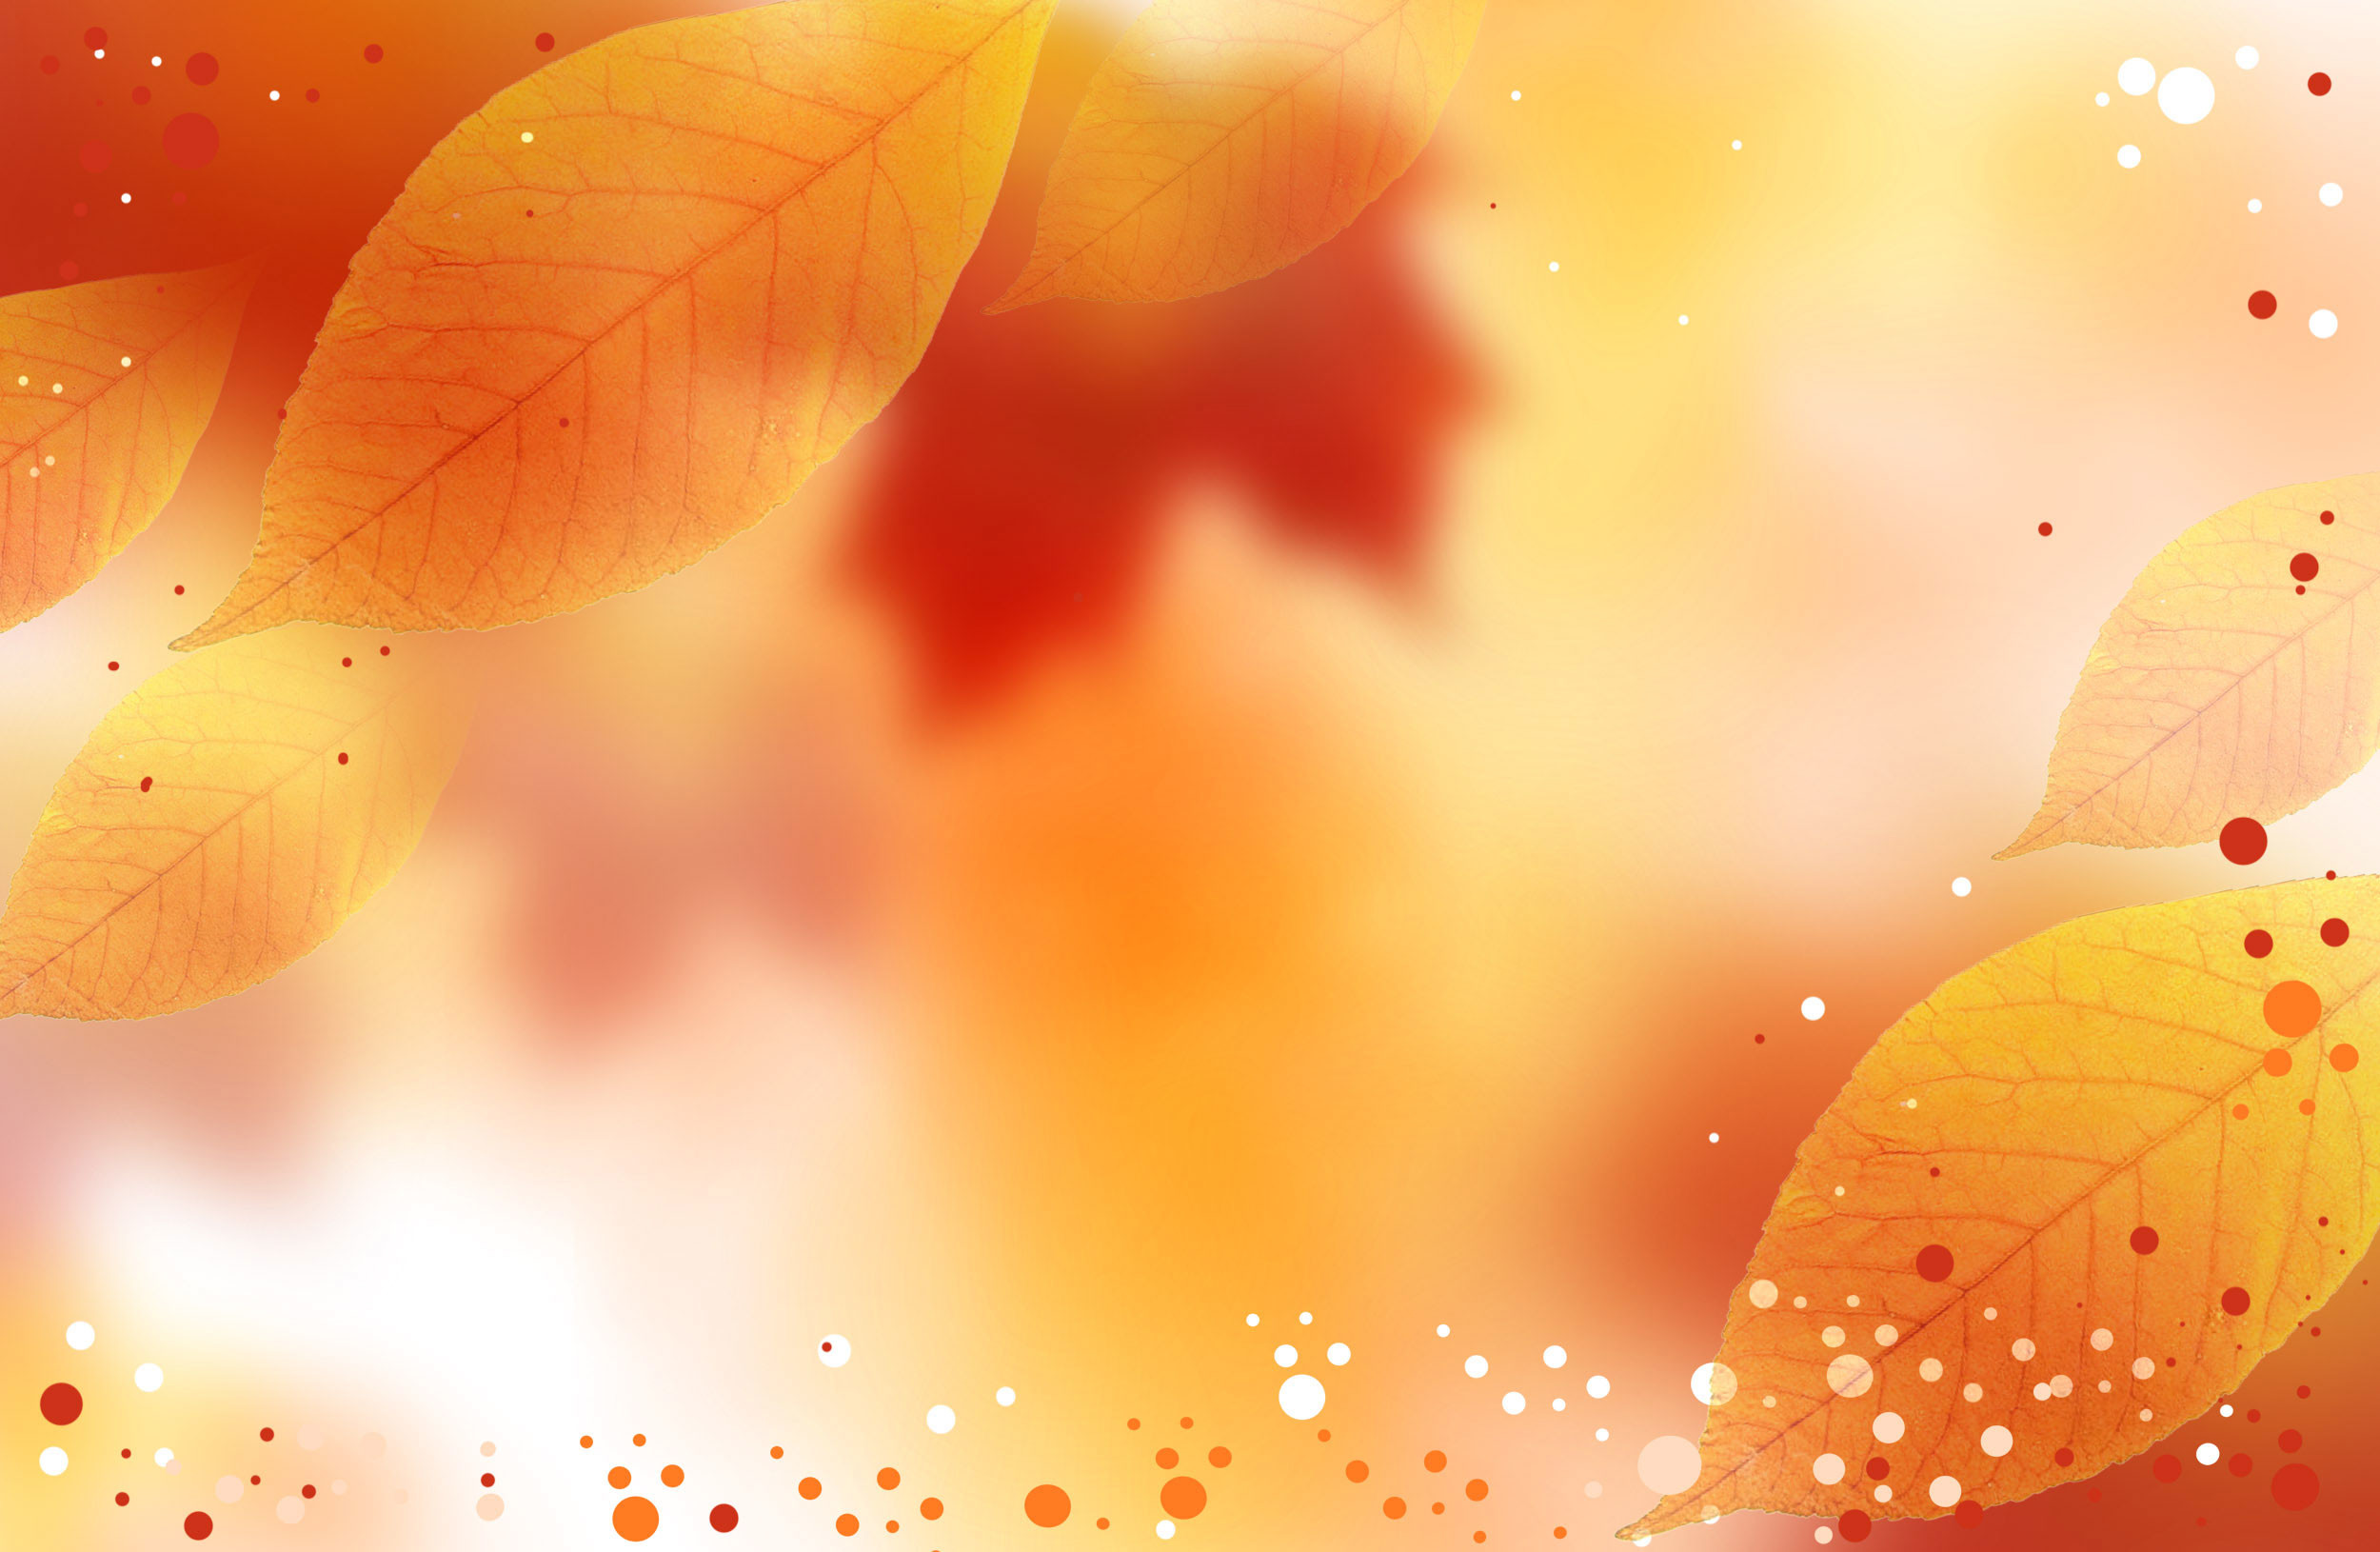 2500x1630 Fall colors on the background with Autumn leaves and white, orange and red  dots as spread and highlights.